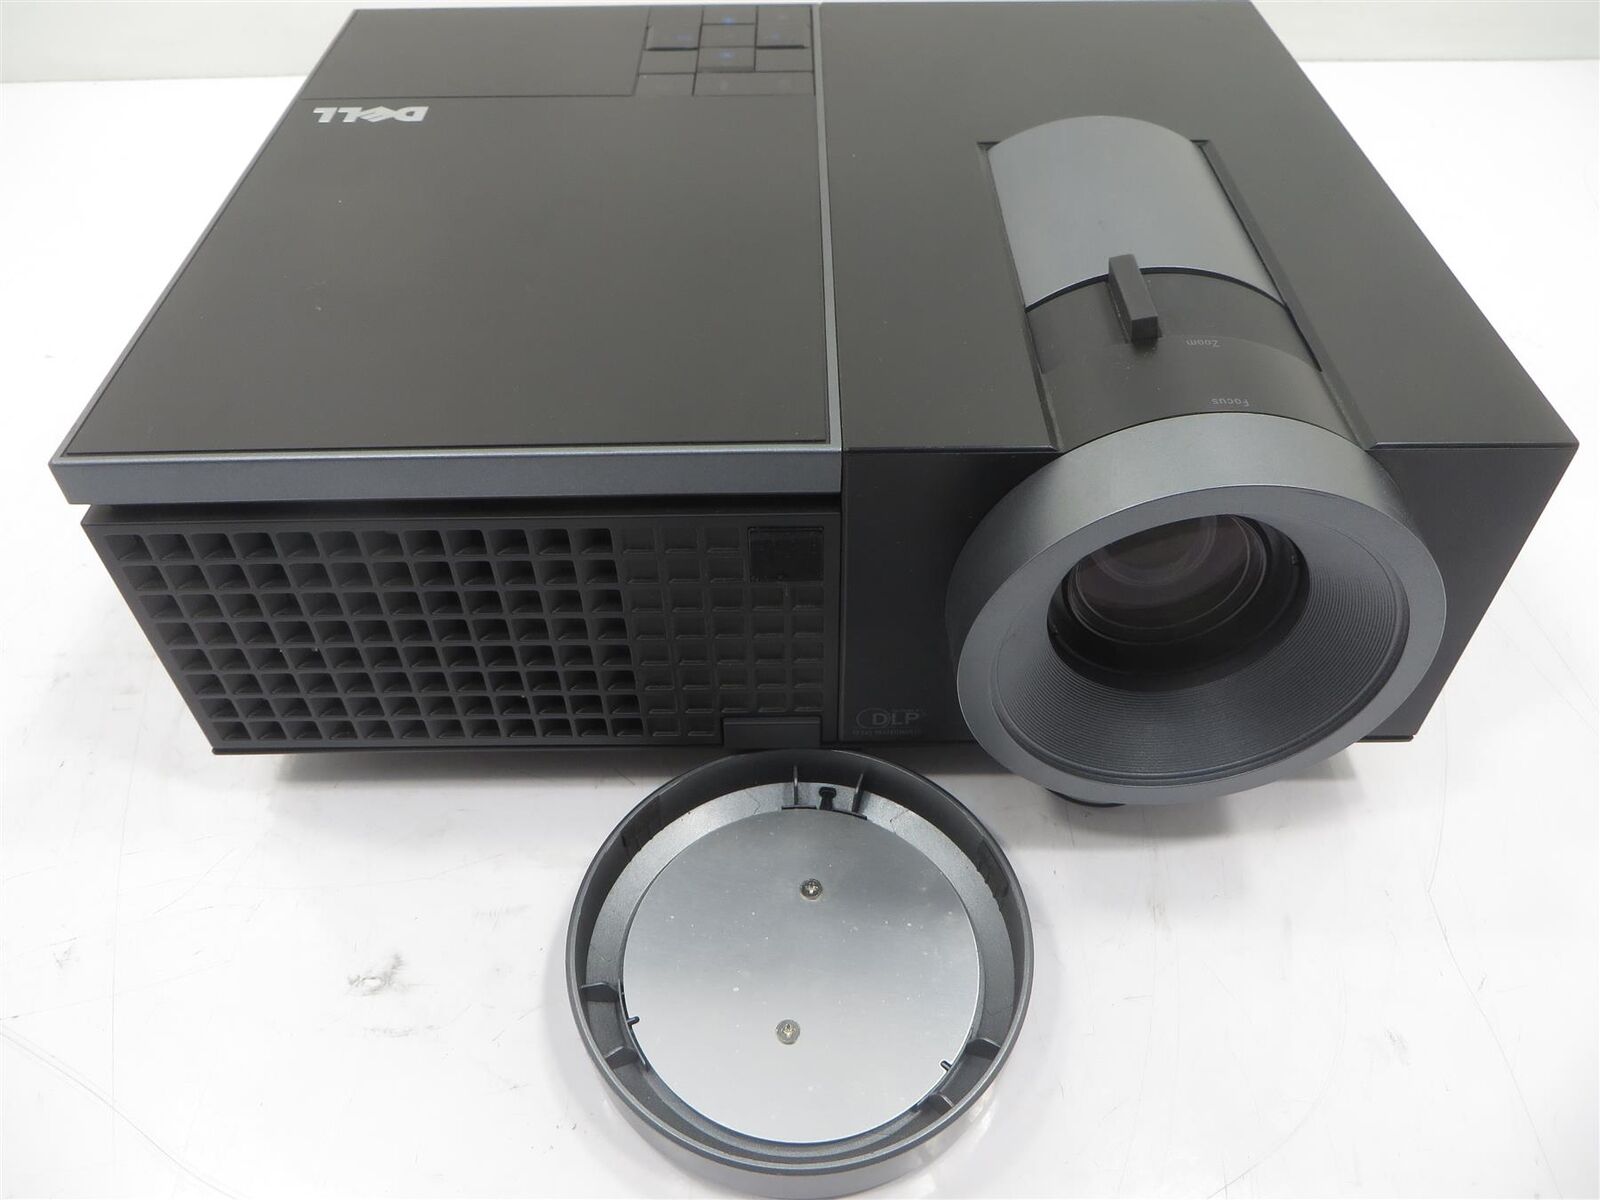 Dell 4210X HDMI Projector-Good Working -Lamp hours 160 hrs